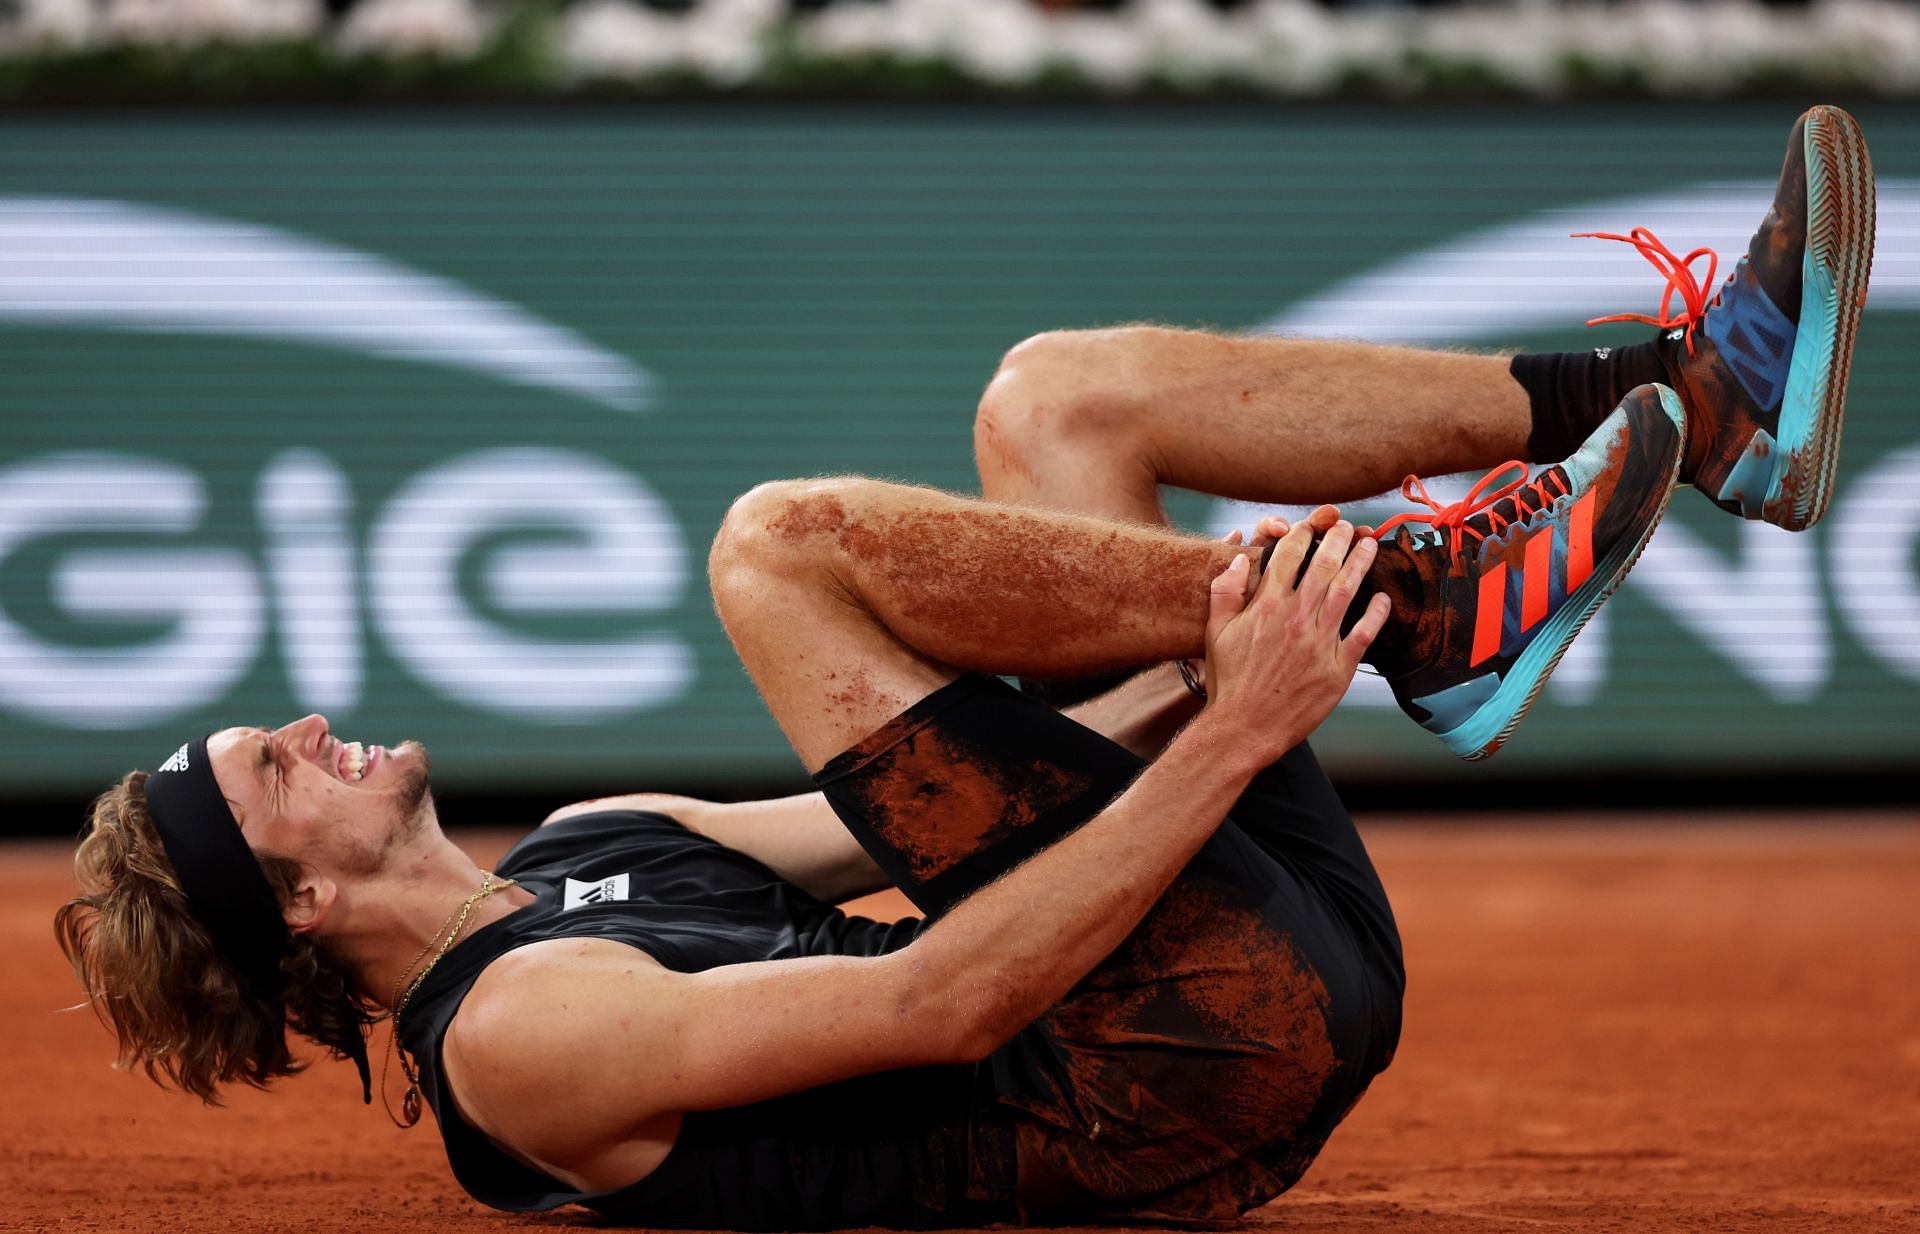 Alexander Zverev injured himself at the French Open 2022.